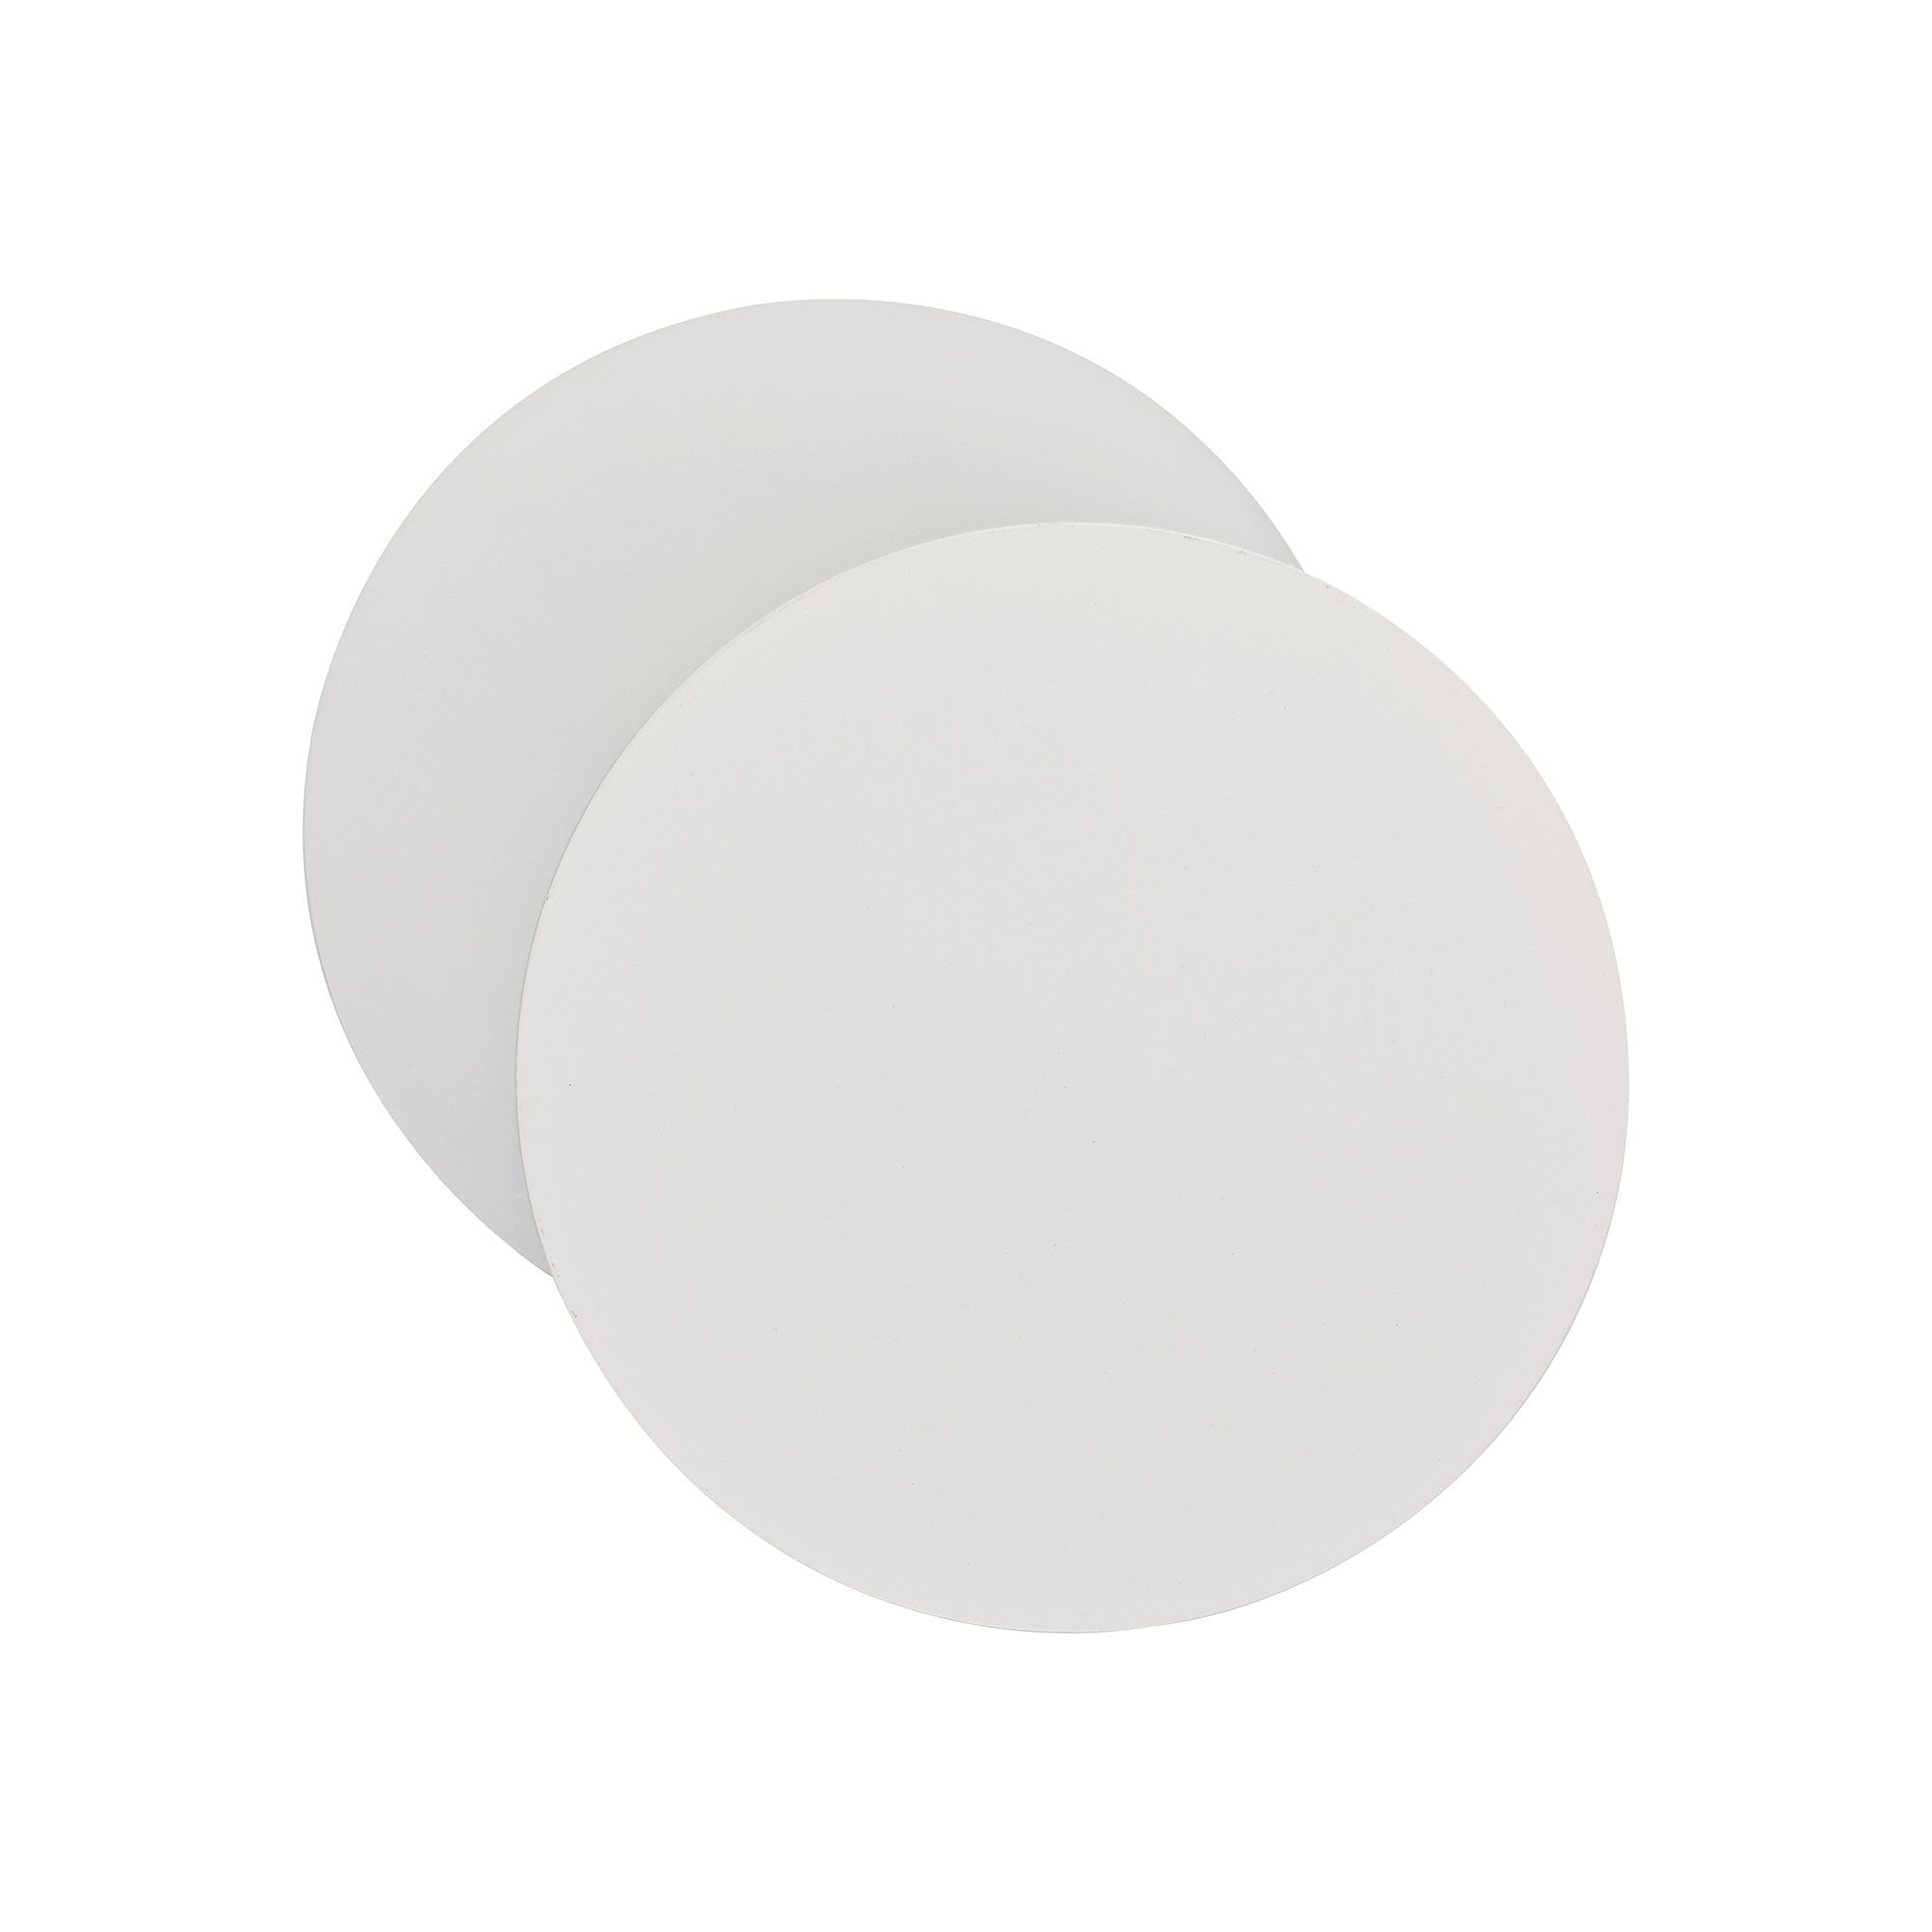 Magnetic Base Wall Lamp, 12W LED 3000K 498lm, 20/19cm Round Right Offset, Sand White/Acrylic Frosted Diffuser